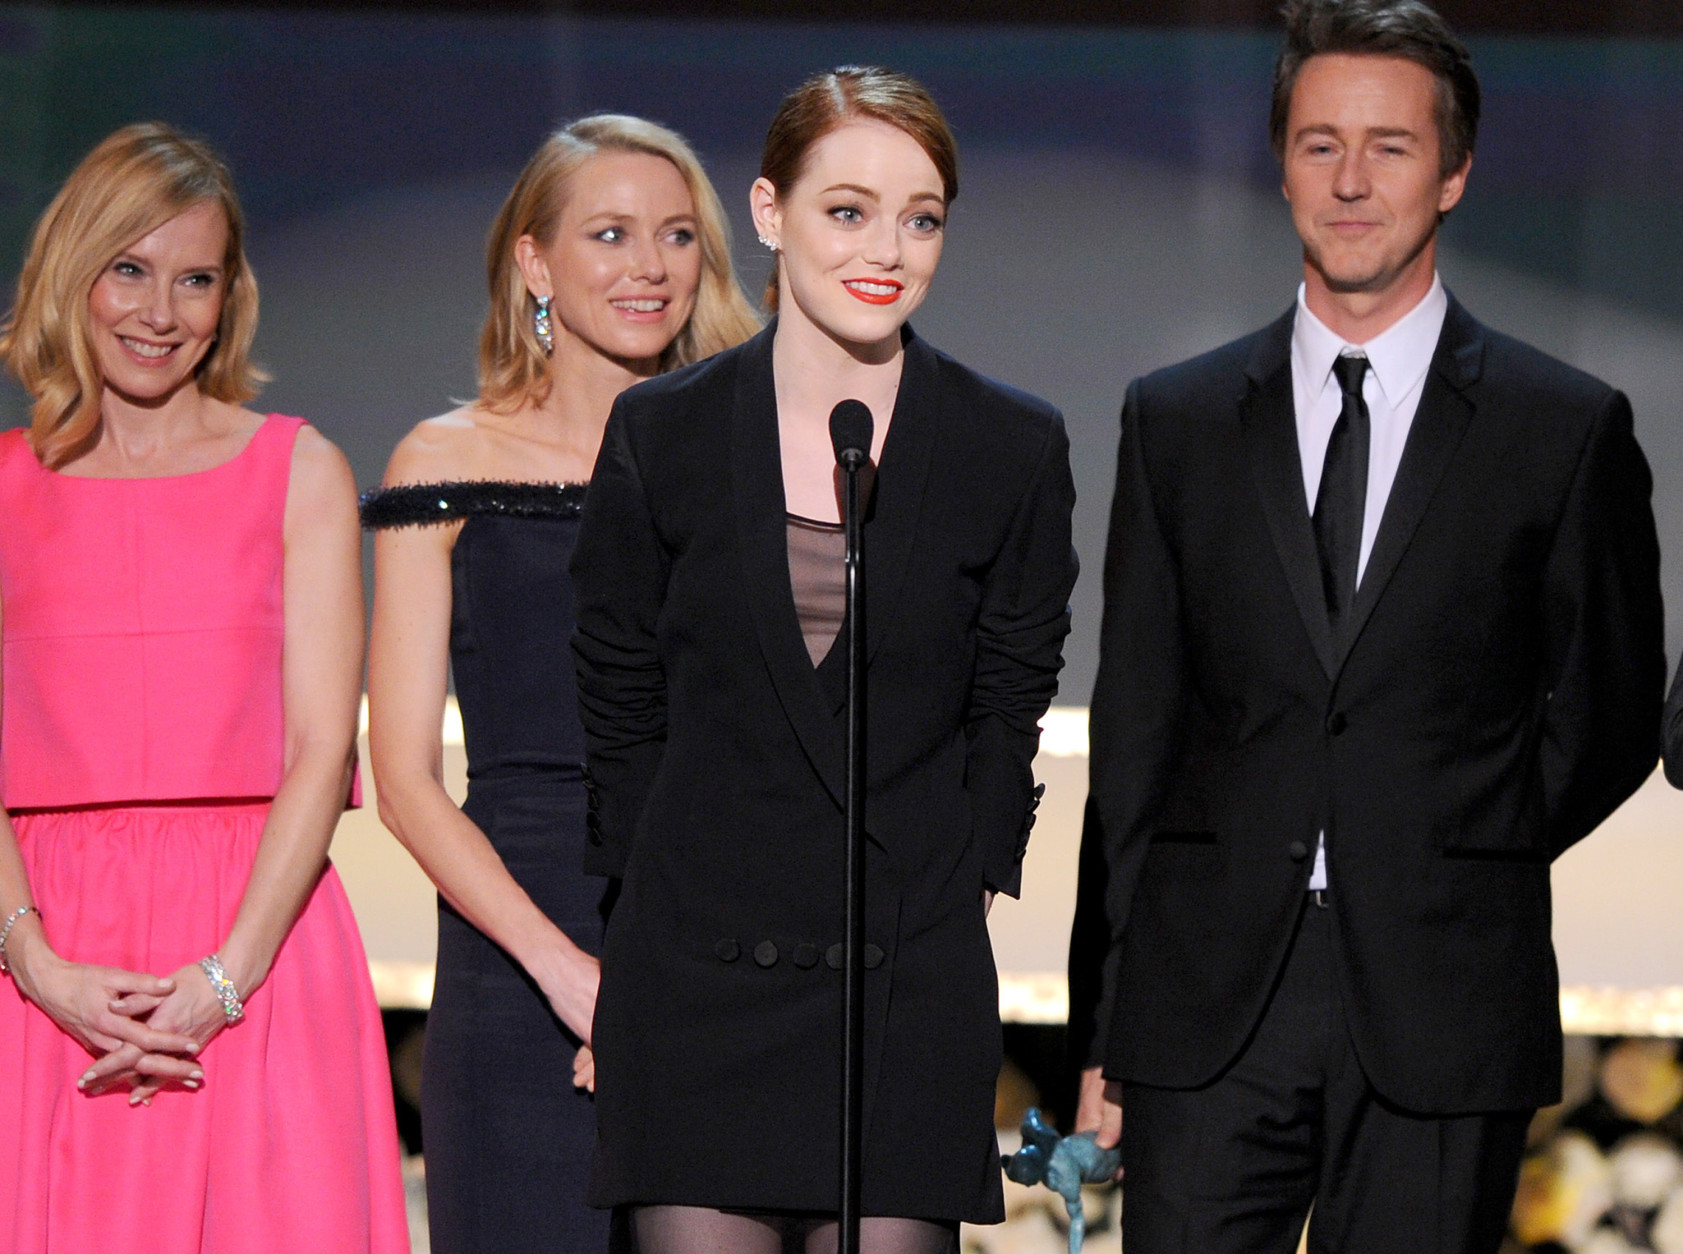 Amy Ryan, from left, Naomi Watts, Emma Stone, and Edward Norton accept the award for outstanding performance by a cast in a motion picture for  Birdman on stage at the 21st annual Screen Actors Guild Awards at the Shrine Auditorium on Sunday, Jan. 25, 2015, in Los Angeles. (Photo by Vince Bucci/Invision/AP)